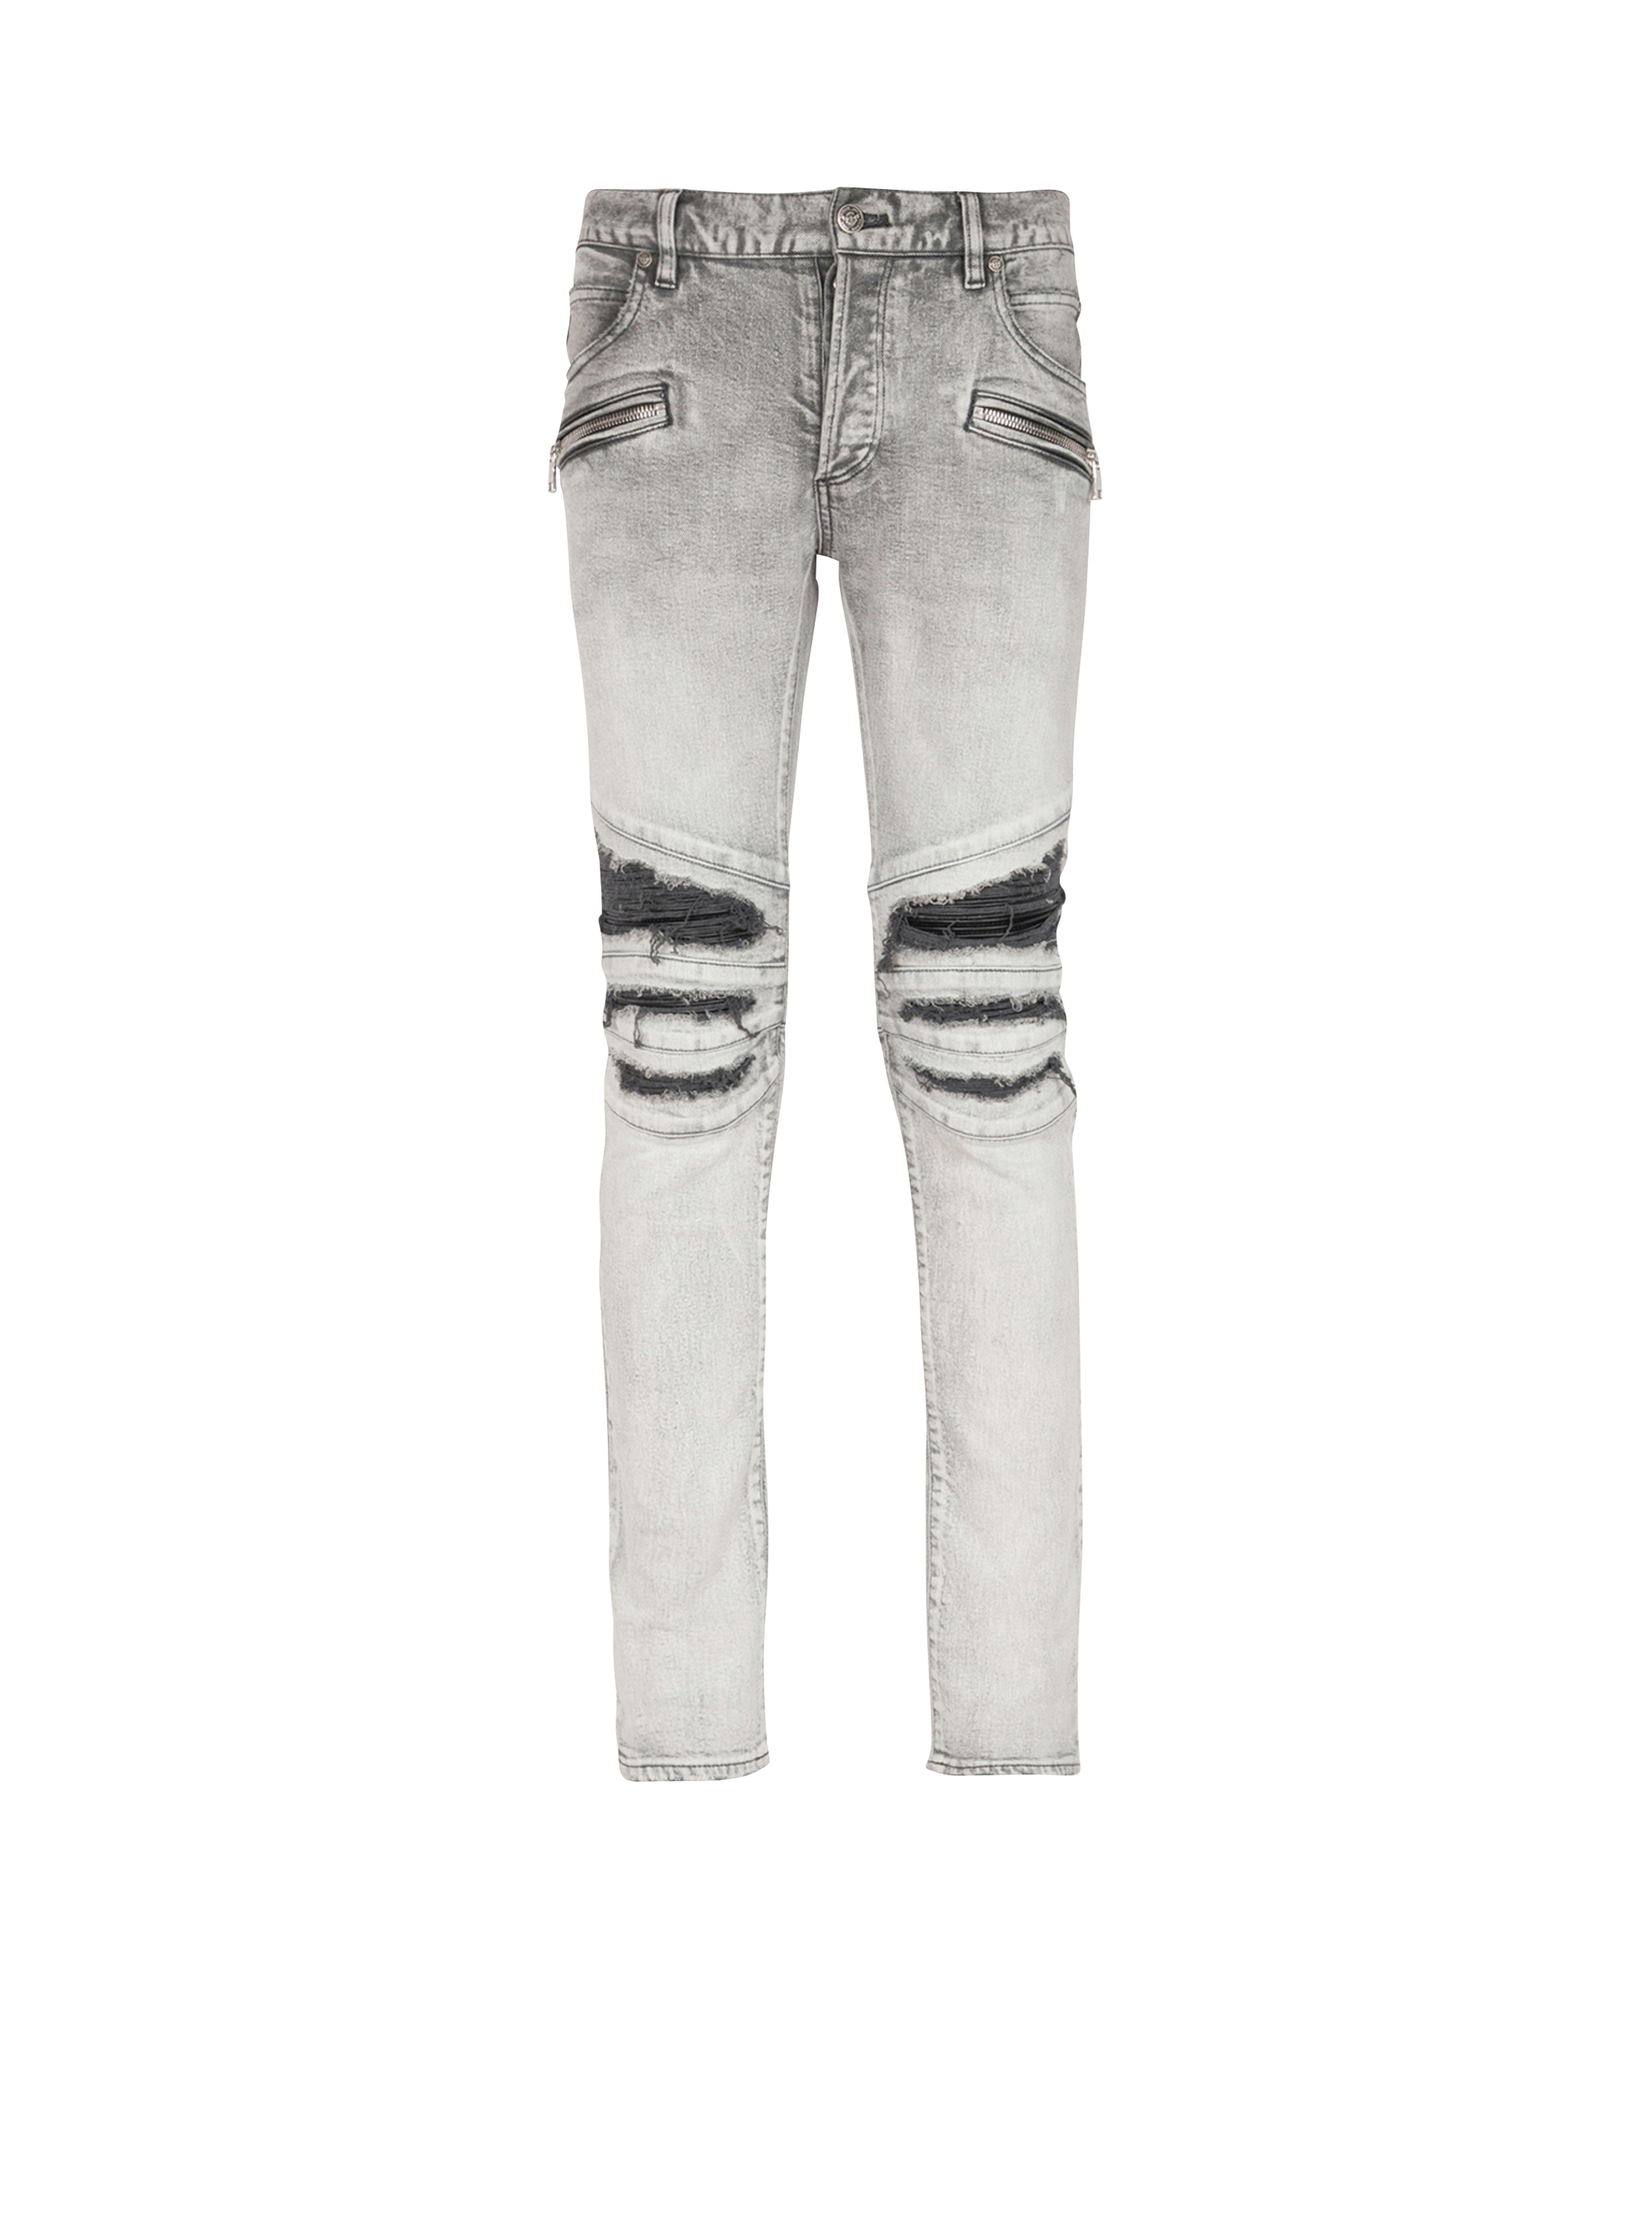 Slim cut ripped cotton jeans with synthetic leather panels, grey